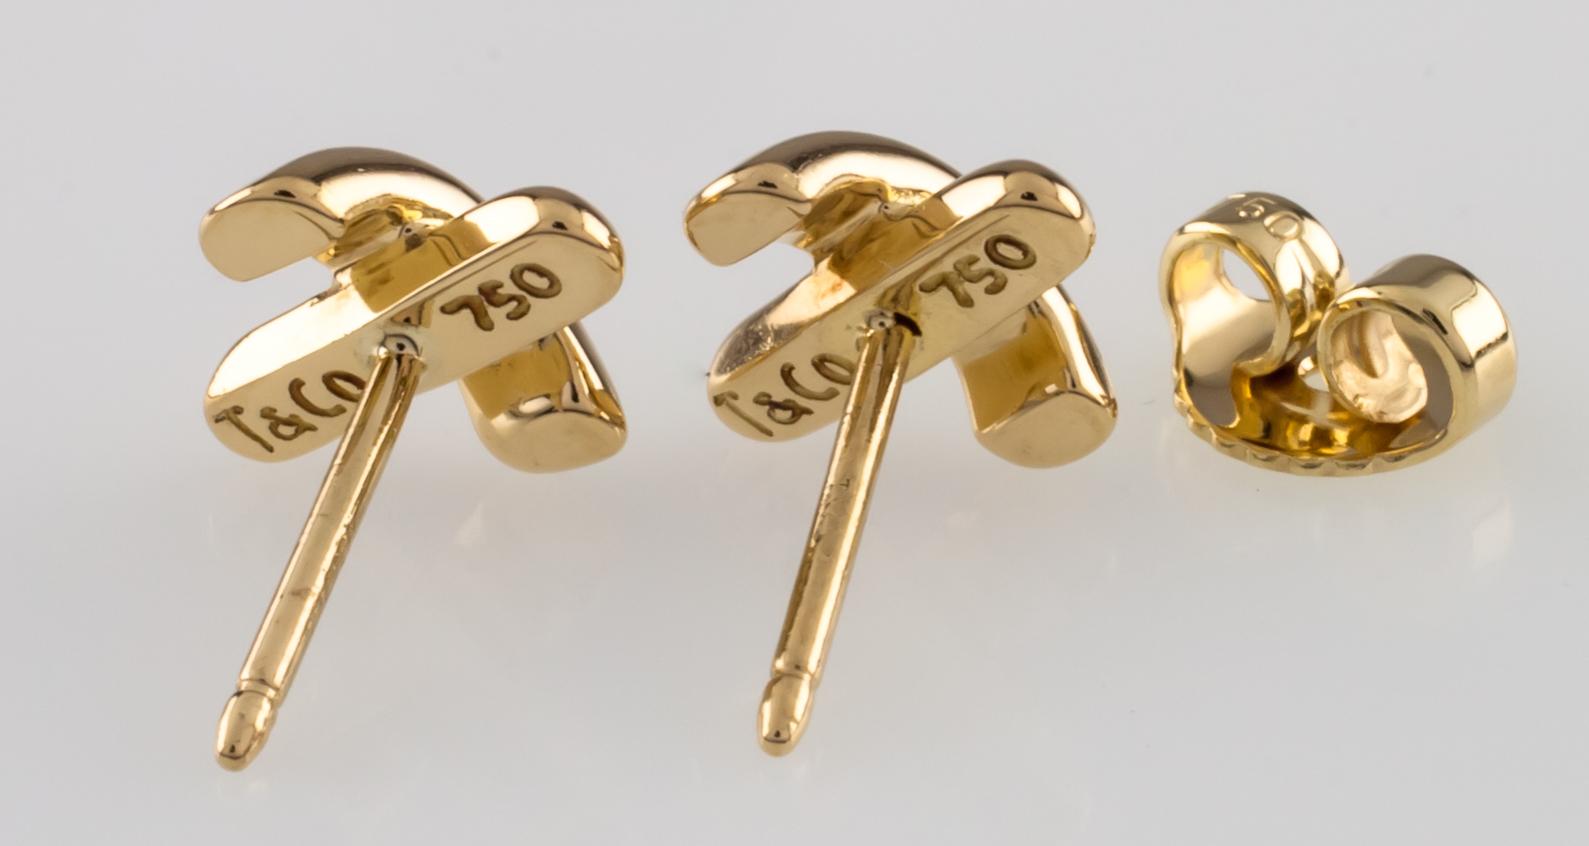 Gorgeous 18k Yellow Gold Earrings by Tiffany & Co.
Feature Paloma Picasso's Trademark 